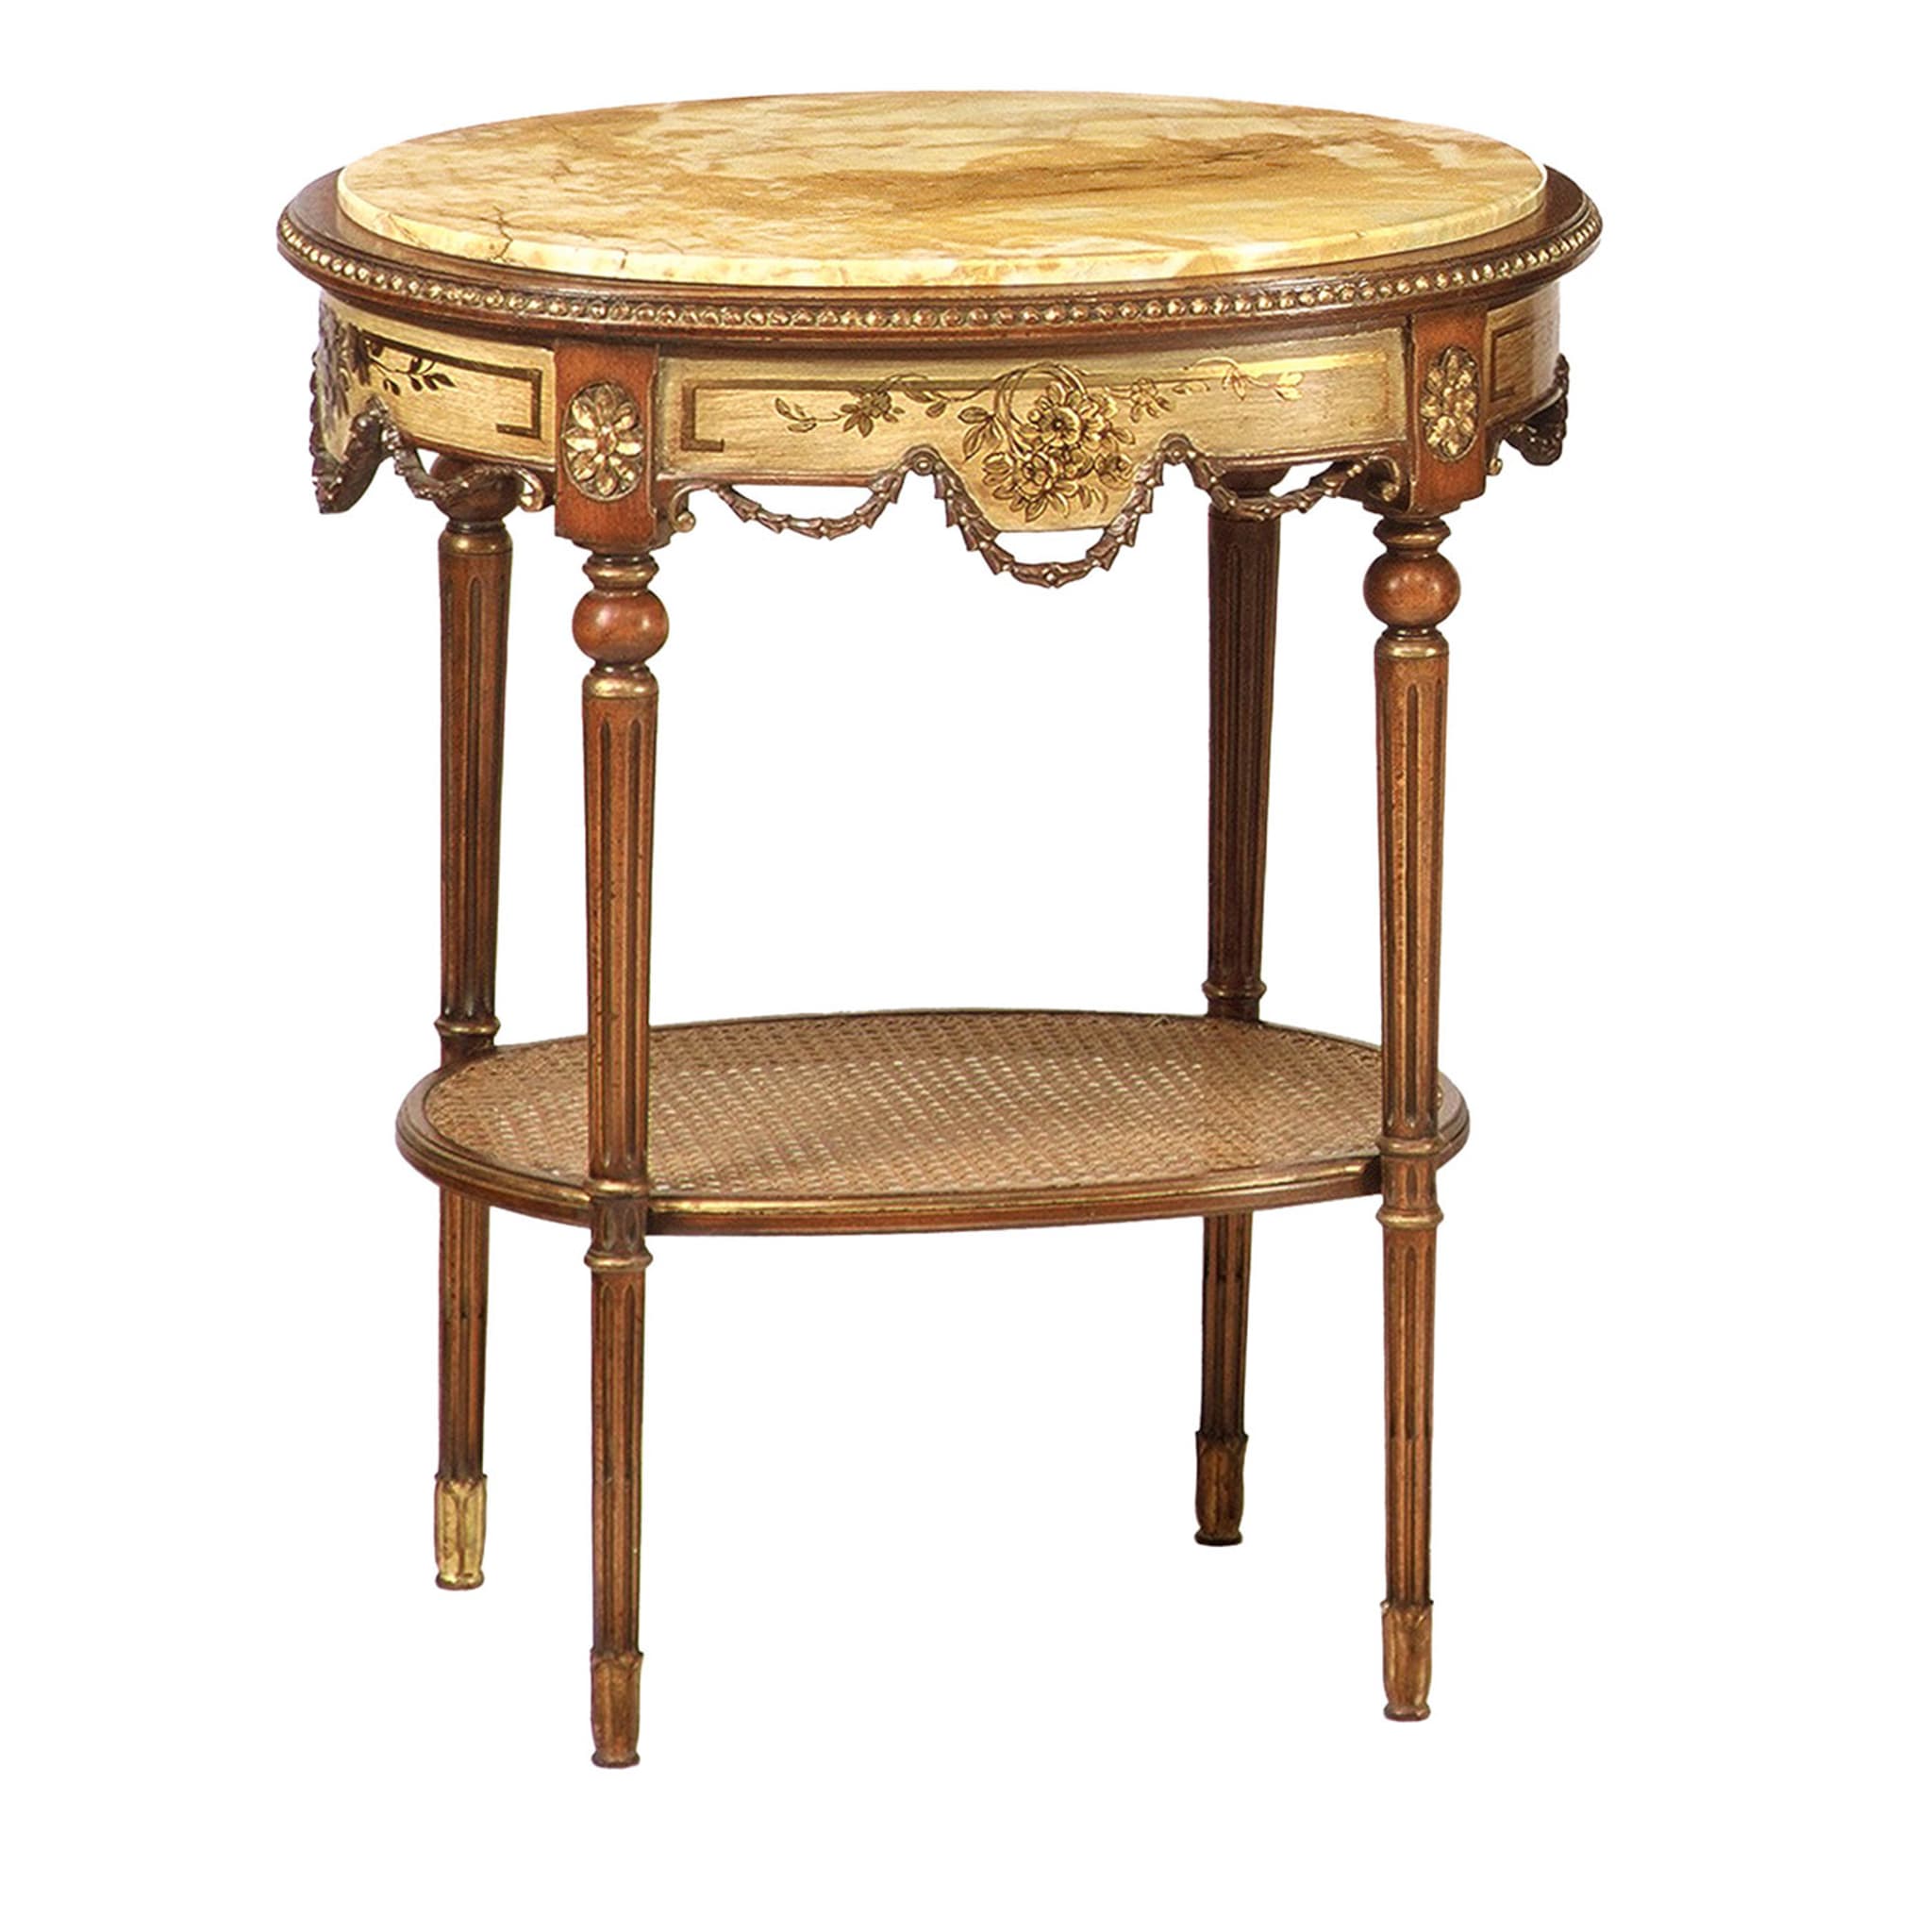 French Neoclassic-Style Oval Side Table #2 - Main view